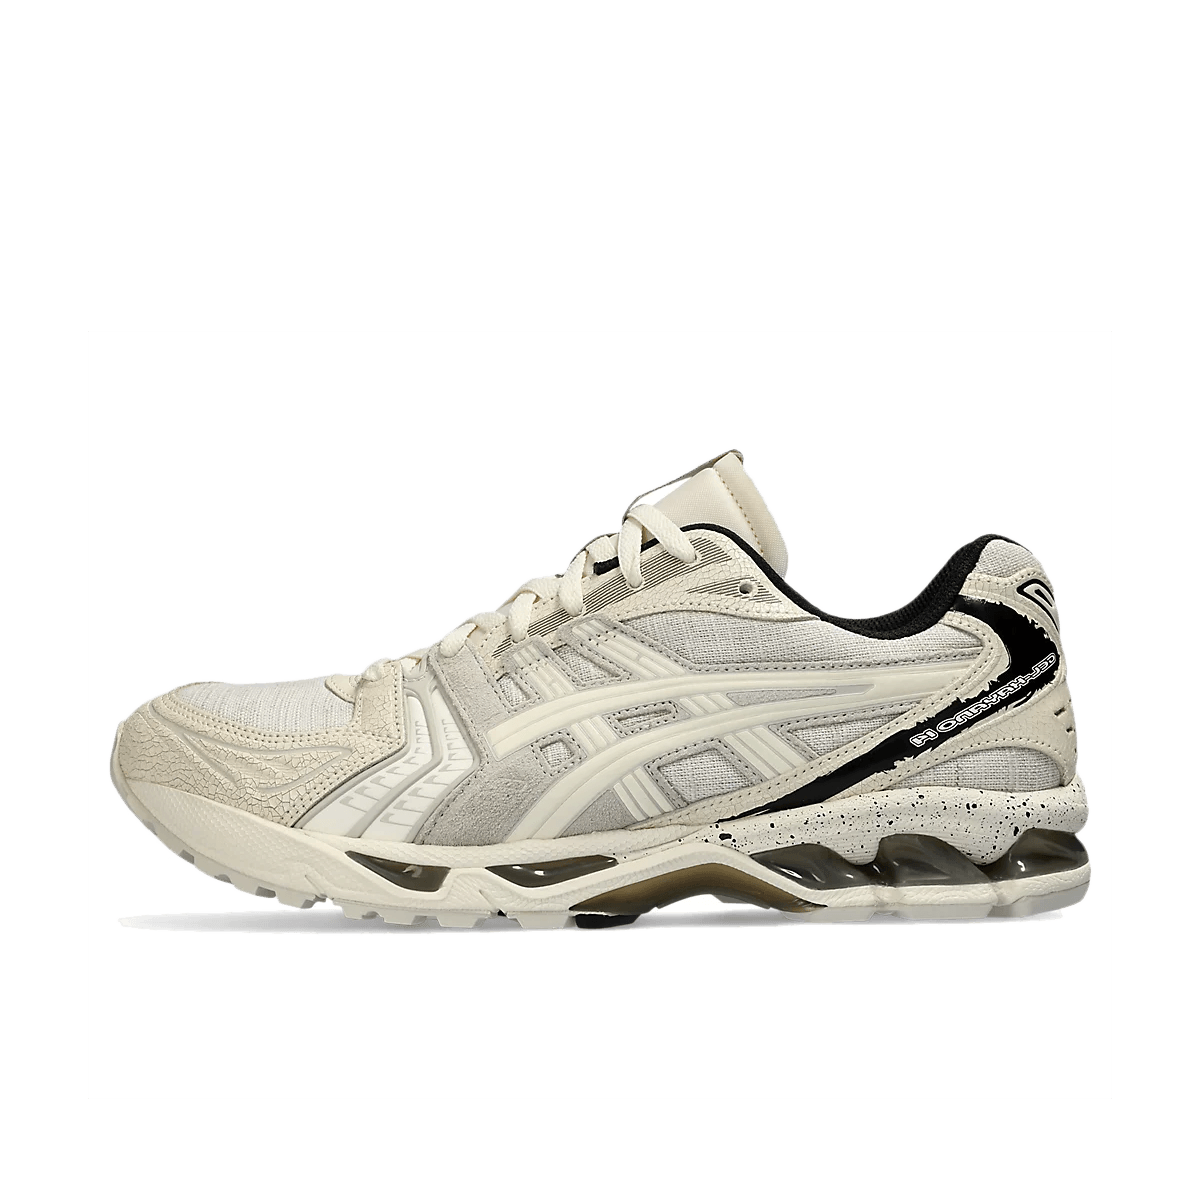 Asics Gel-Kayano 14 'Cream' - Imperfection Pack 1203A416-100